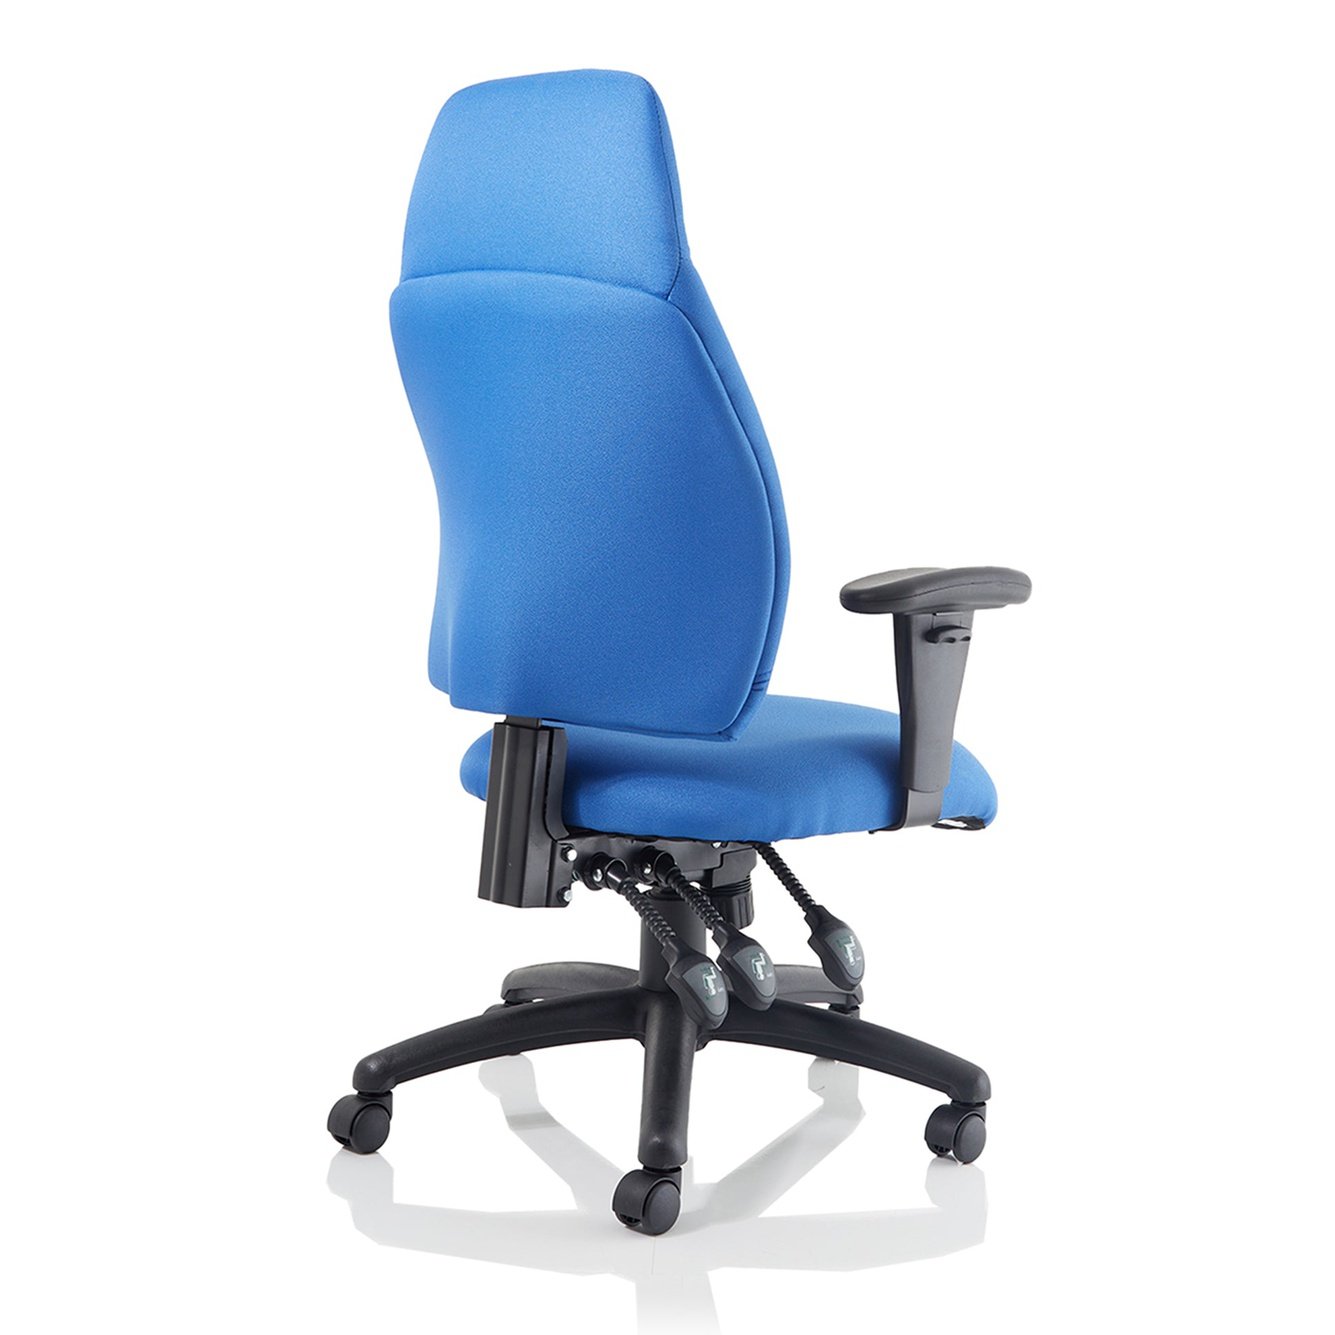 Esme High Back Task Operator Chair with Arms - Fabric Seat & Back, Adjustable Height, 125kg Capacity, 8hr Usage, 2yr Warranty (Flat Packed)